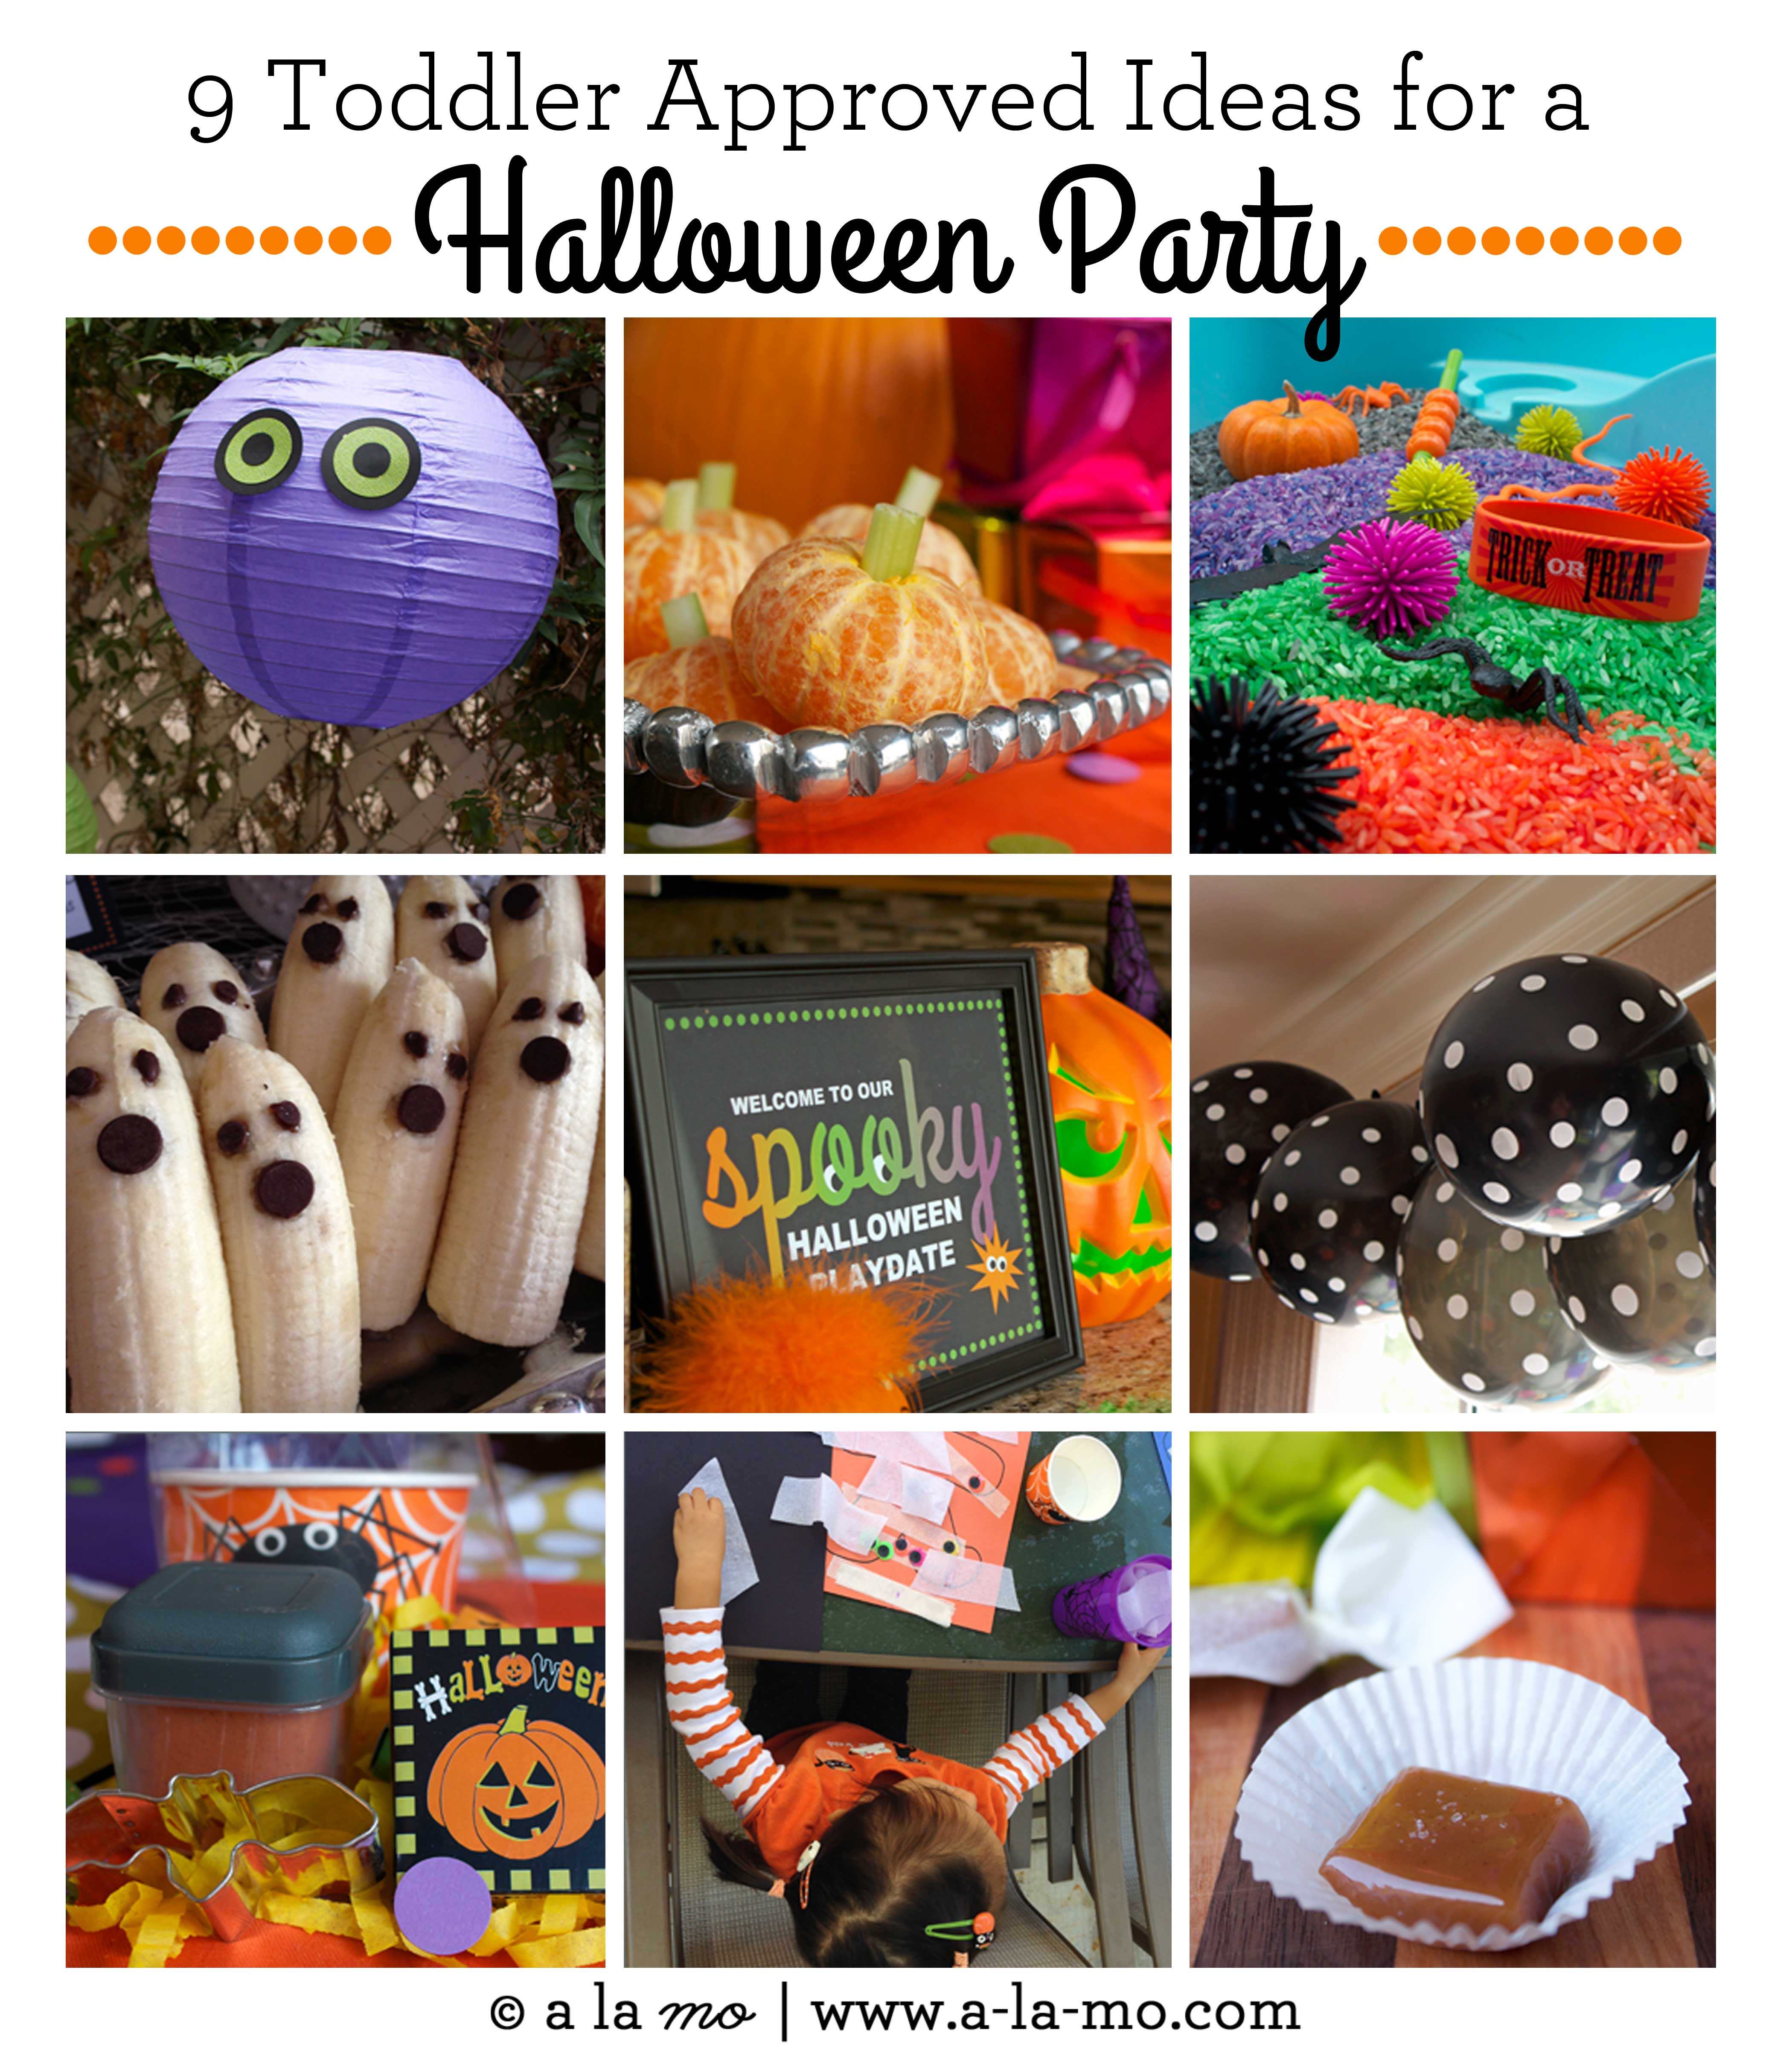 Toddlers Halloween Party Ideas
 Spooky Toddler Playdate a Halloween Party